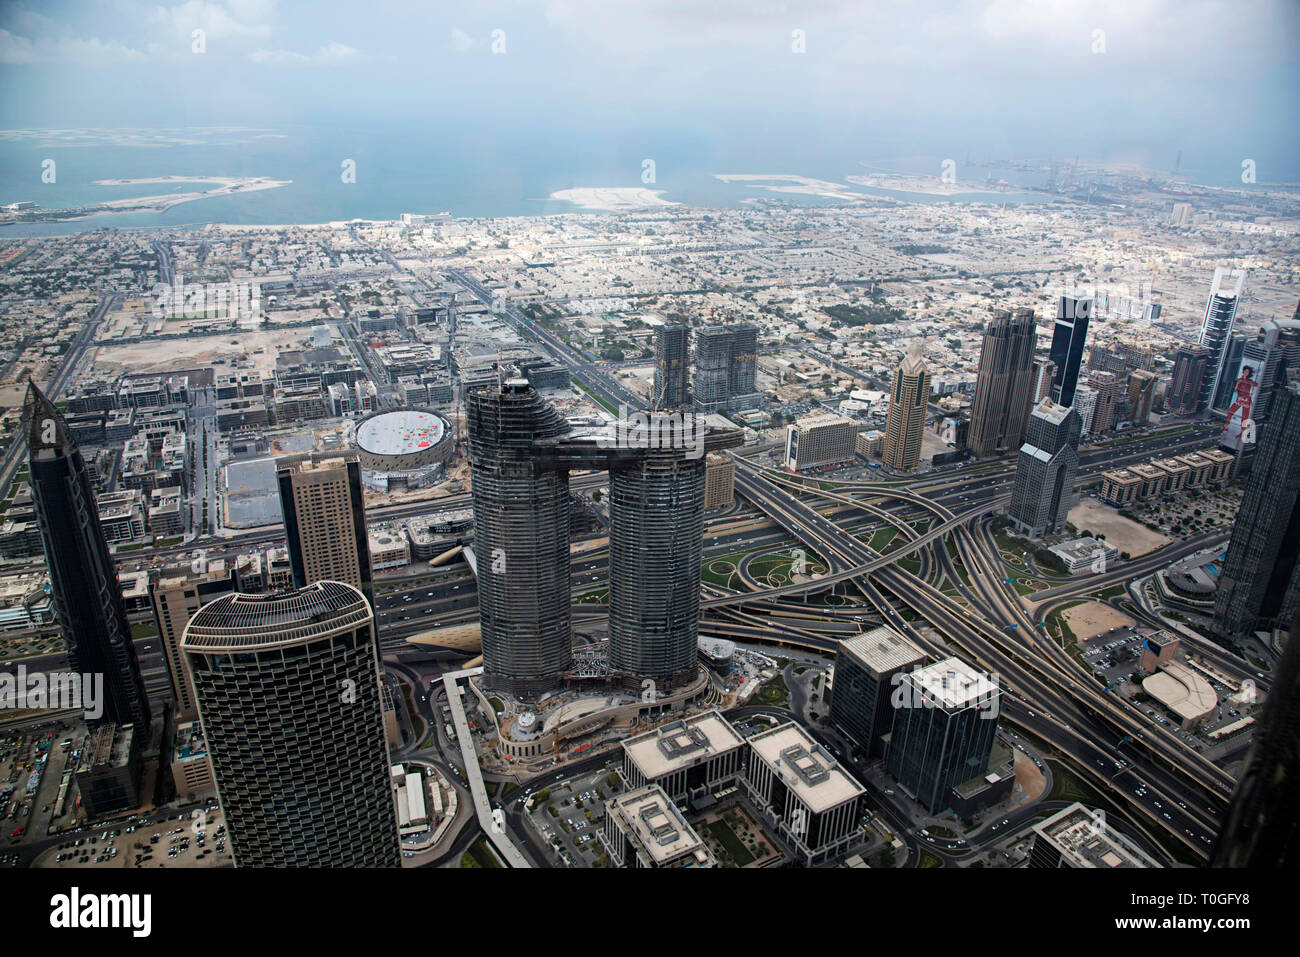 View Of Buildings From 124 Th Floor Of Burj Khalifa Tallest